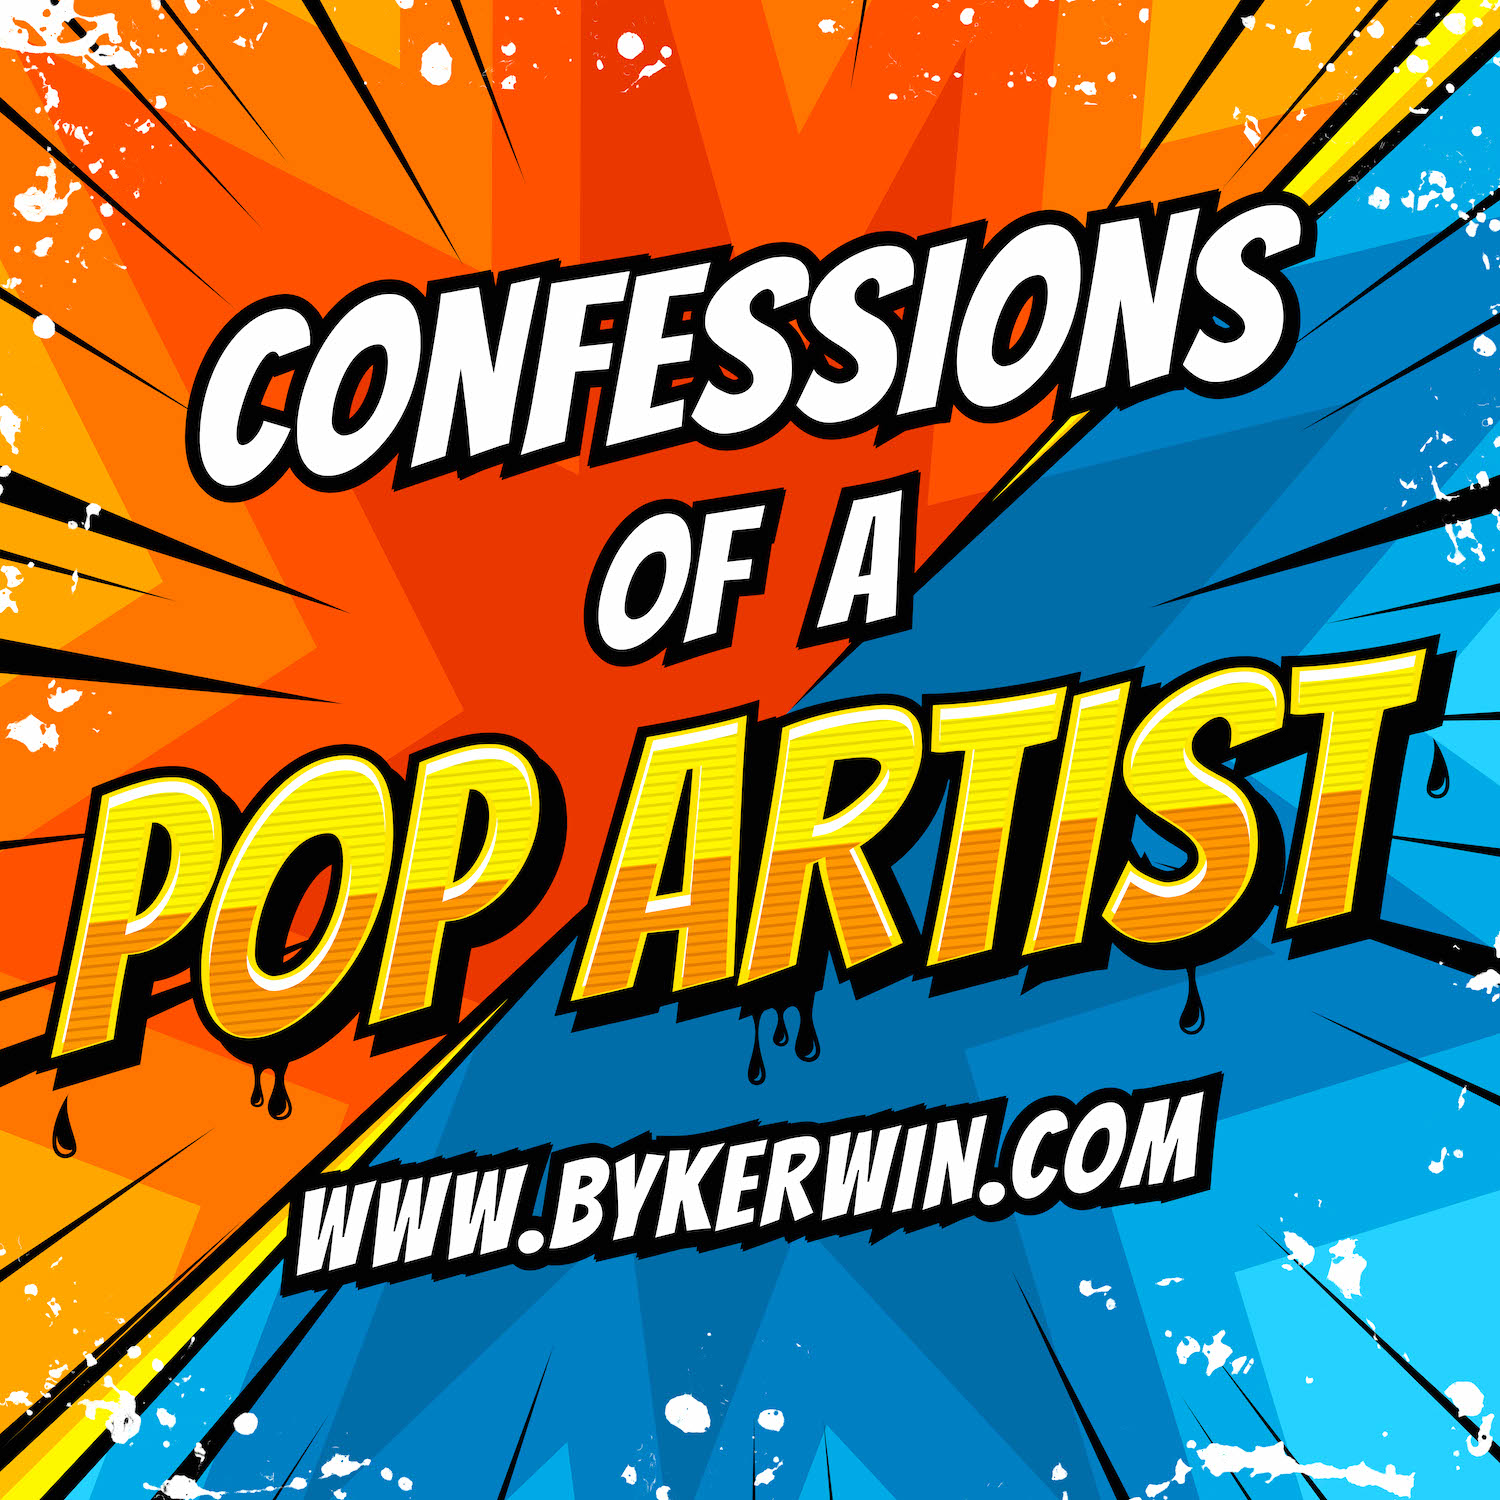 Confessions Of A Pop Artist | By Kerwin Blog